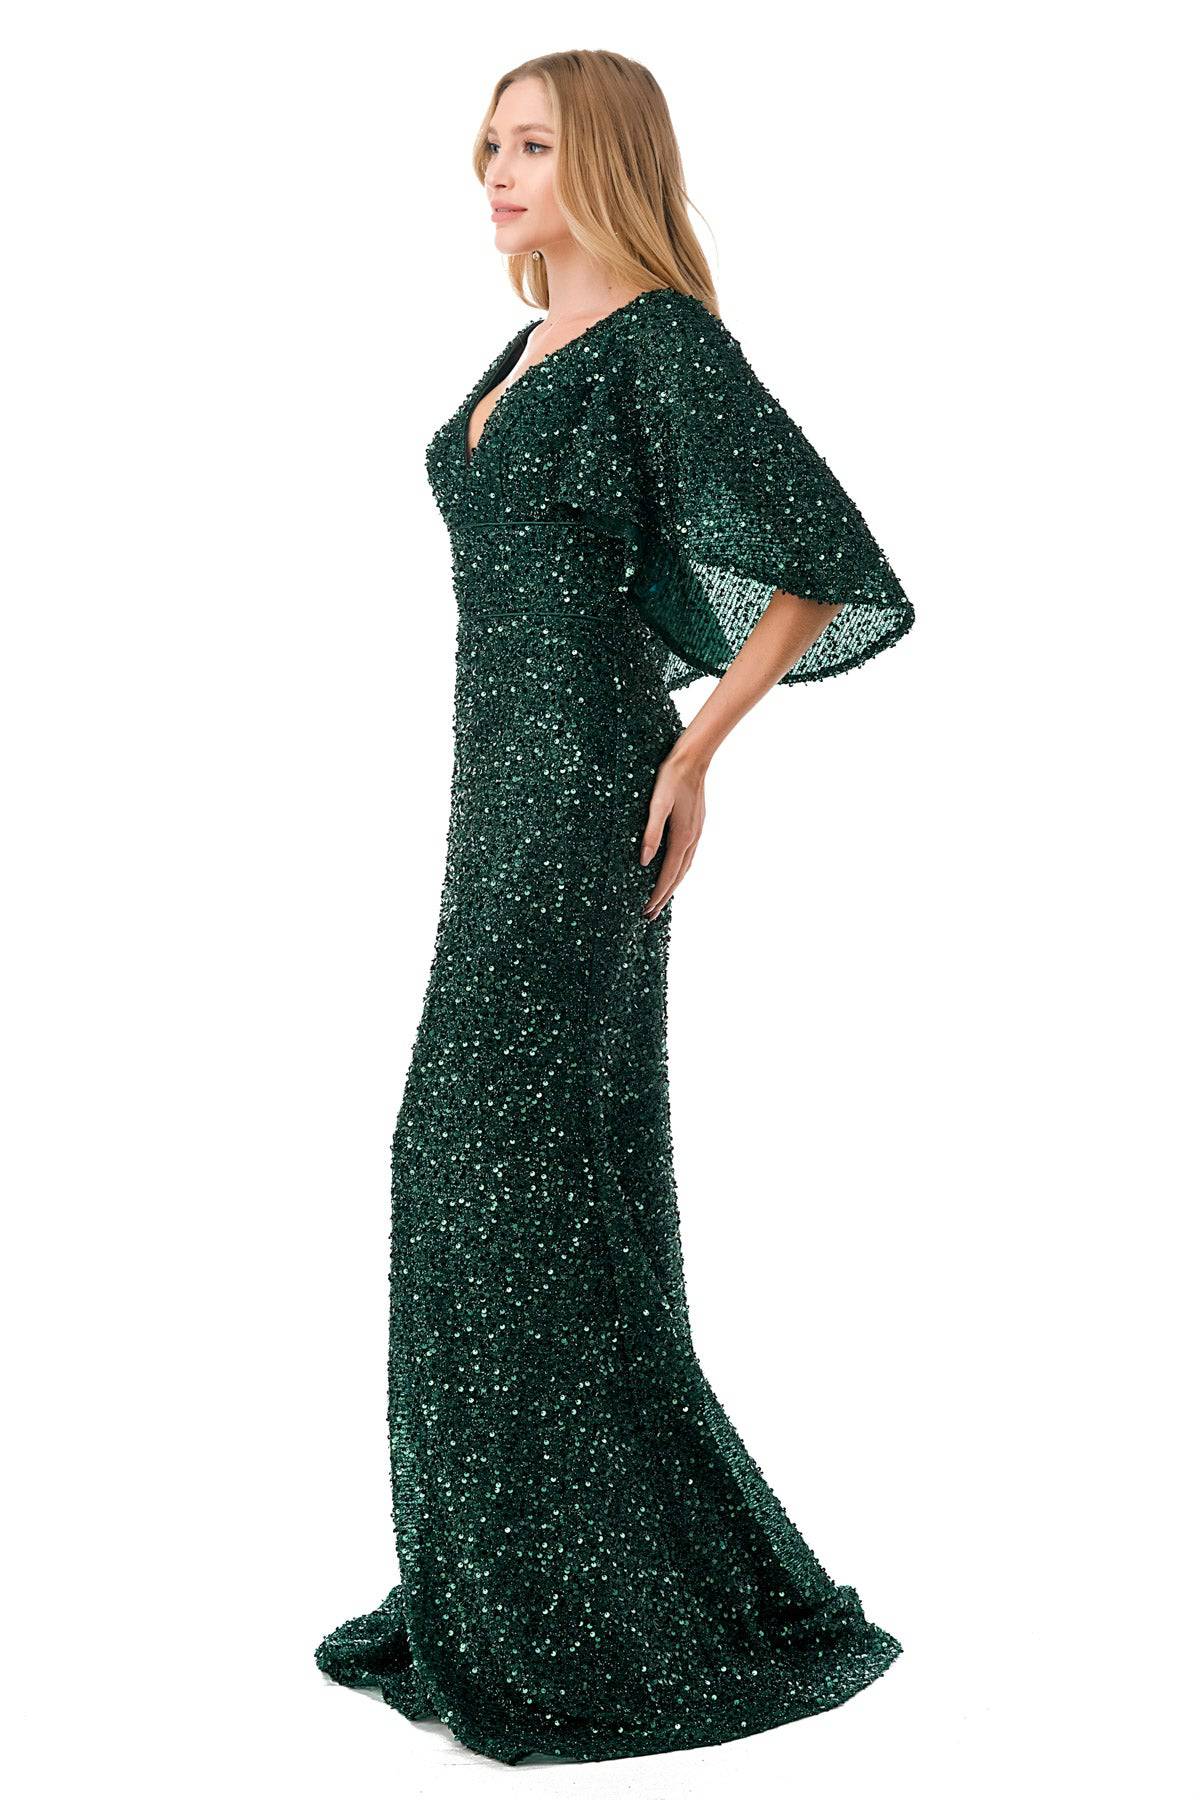 Aspeed M2751T Showstopping Emerald Sequin Flowing Sleeve Dress | 9 Colors - NORMA REED